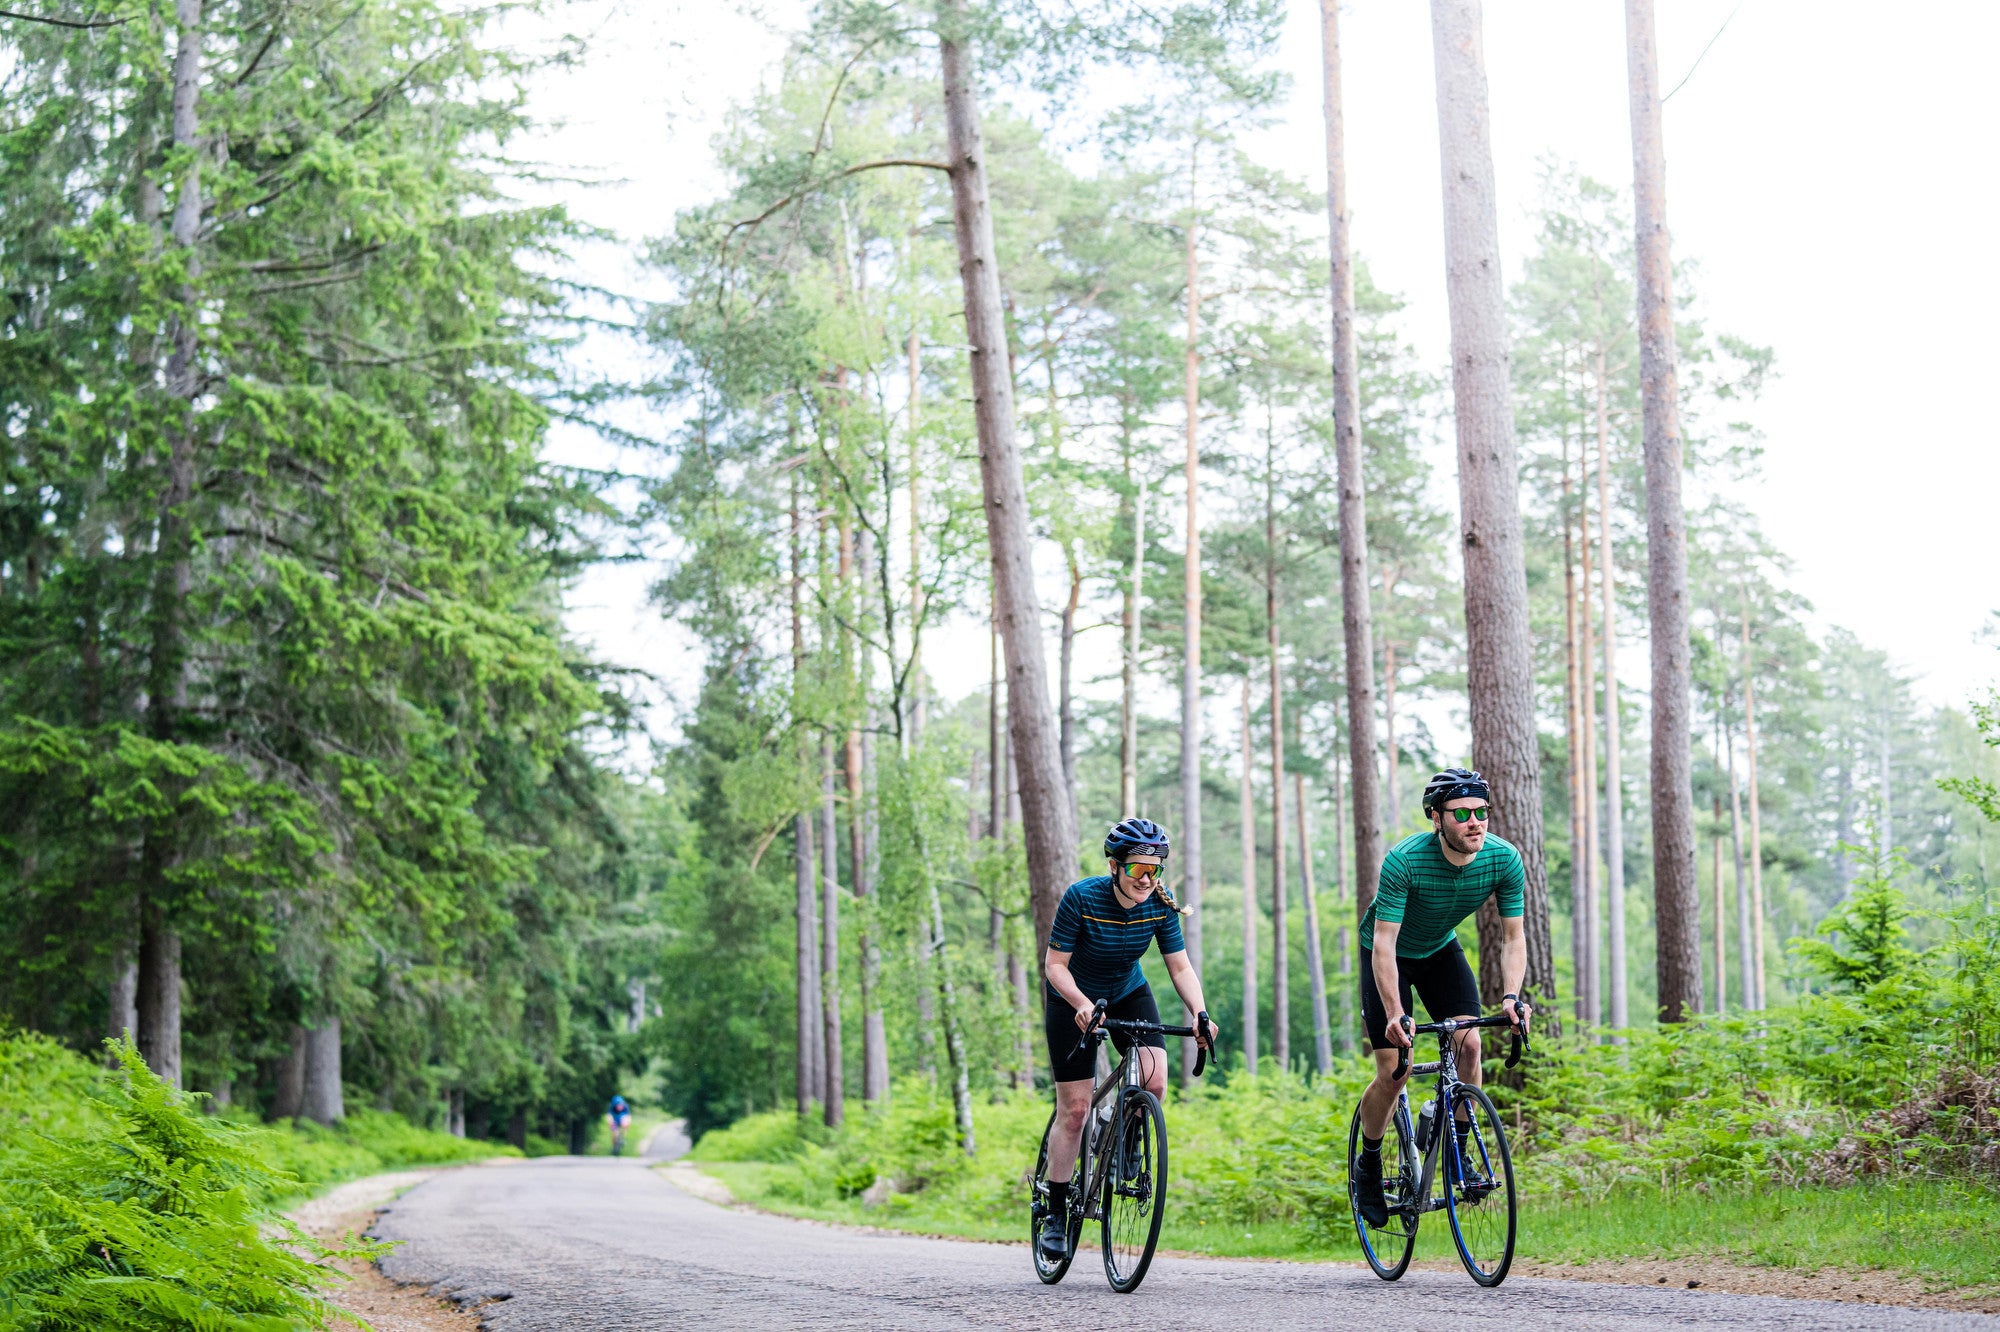 Two cyclists wearing Rivelo cycling apparel, riding on a forest road